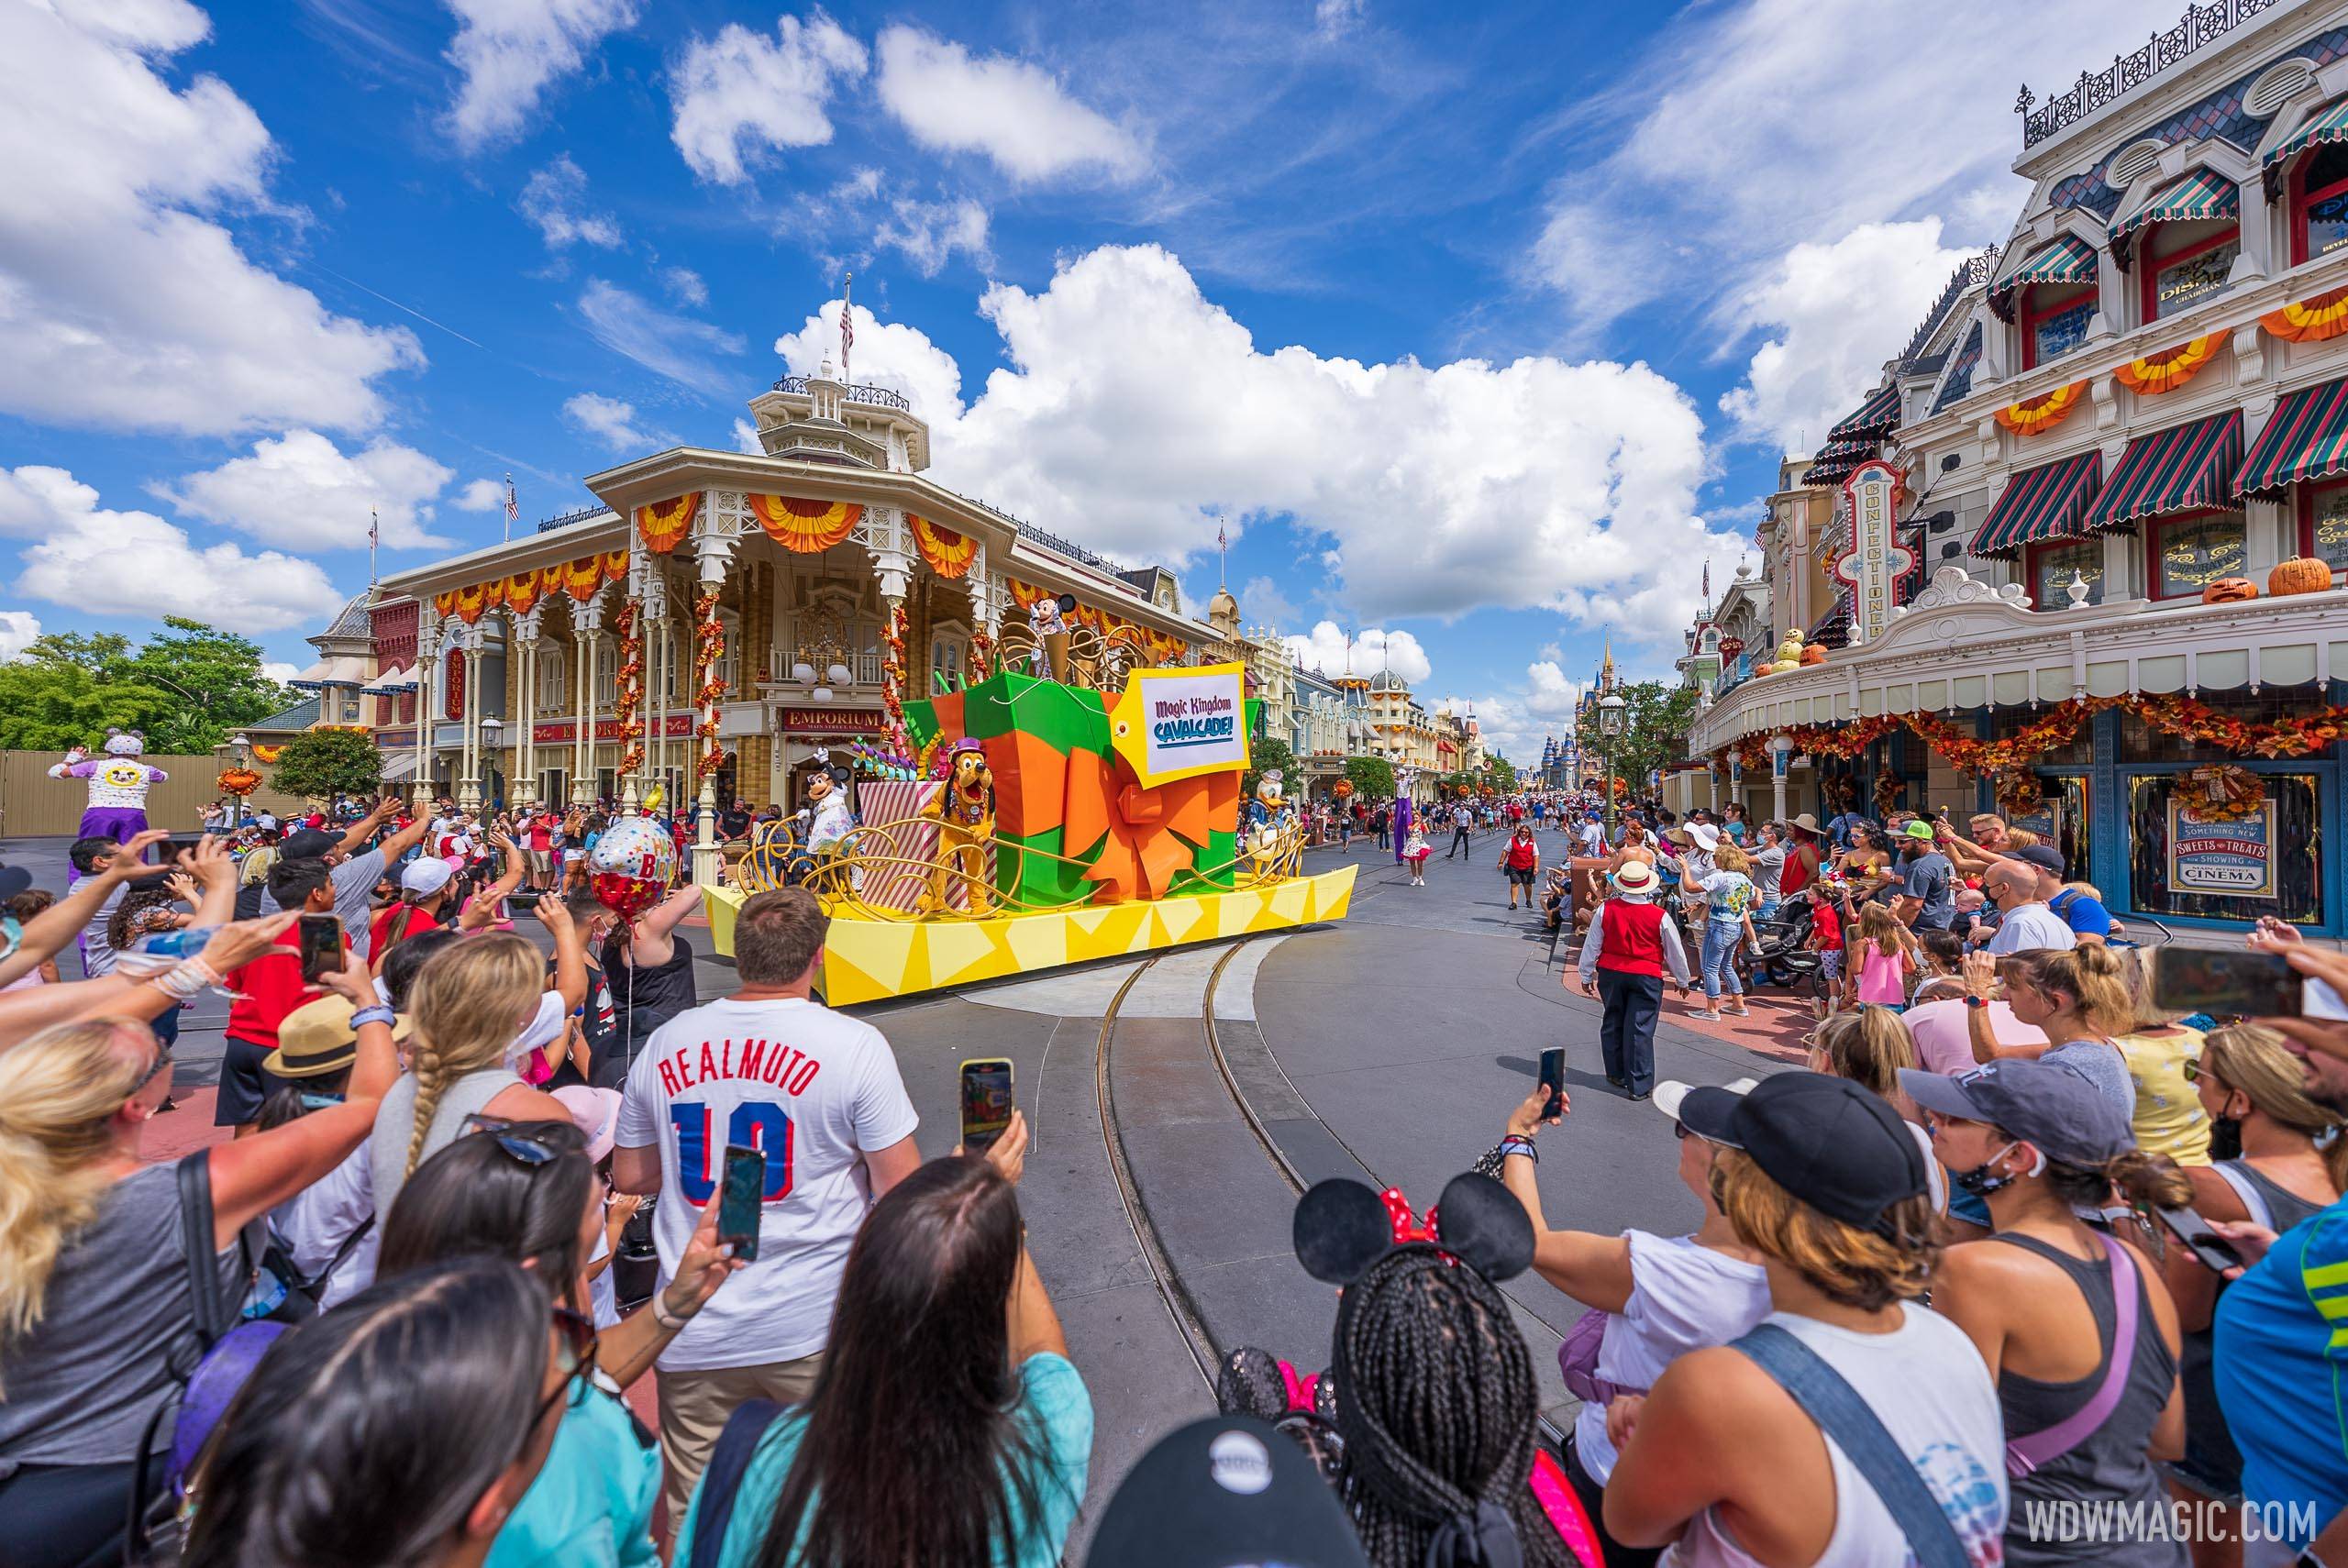 Attendance continues to rise at Walt Disney World as capacity increases